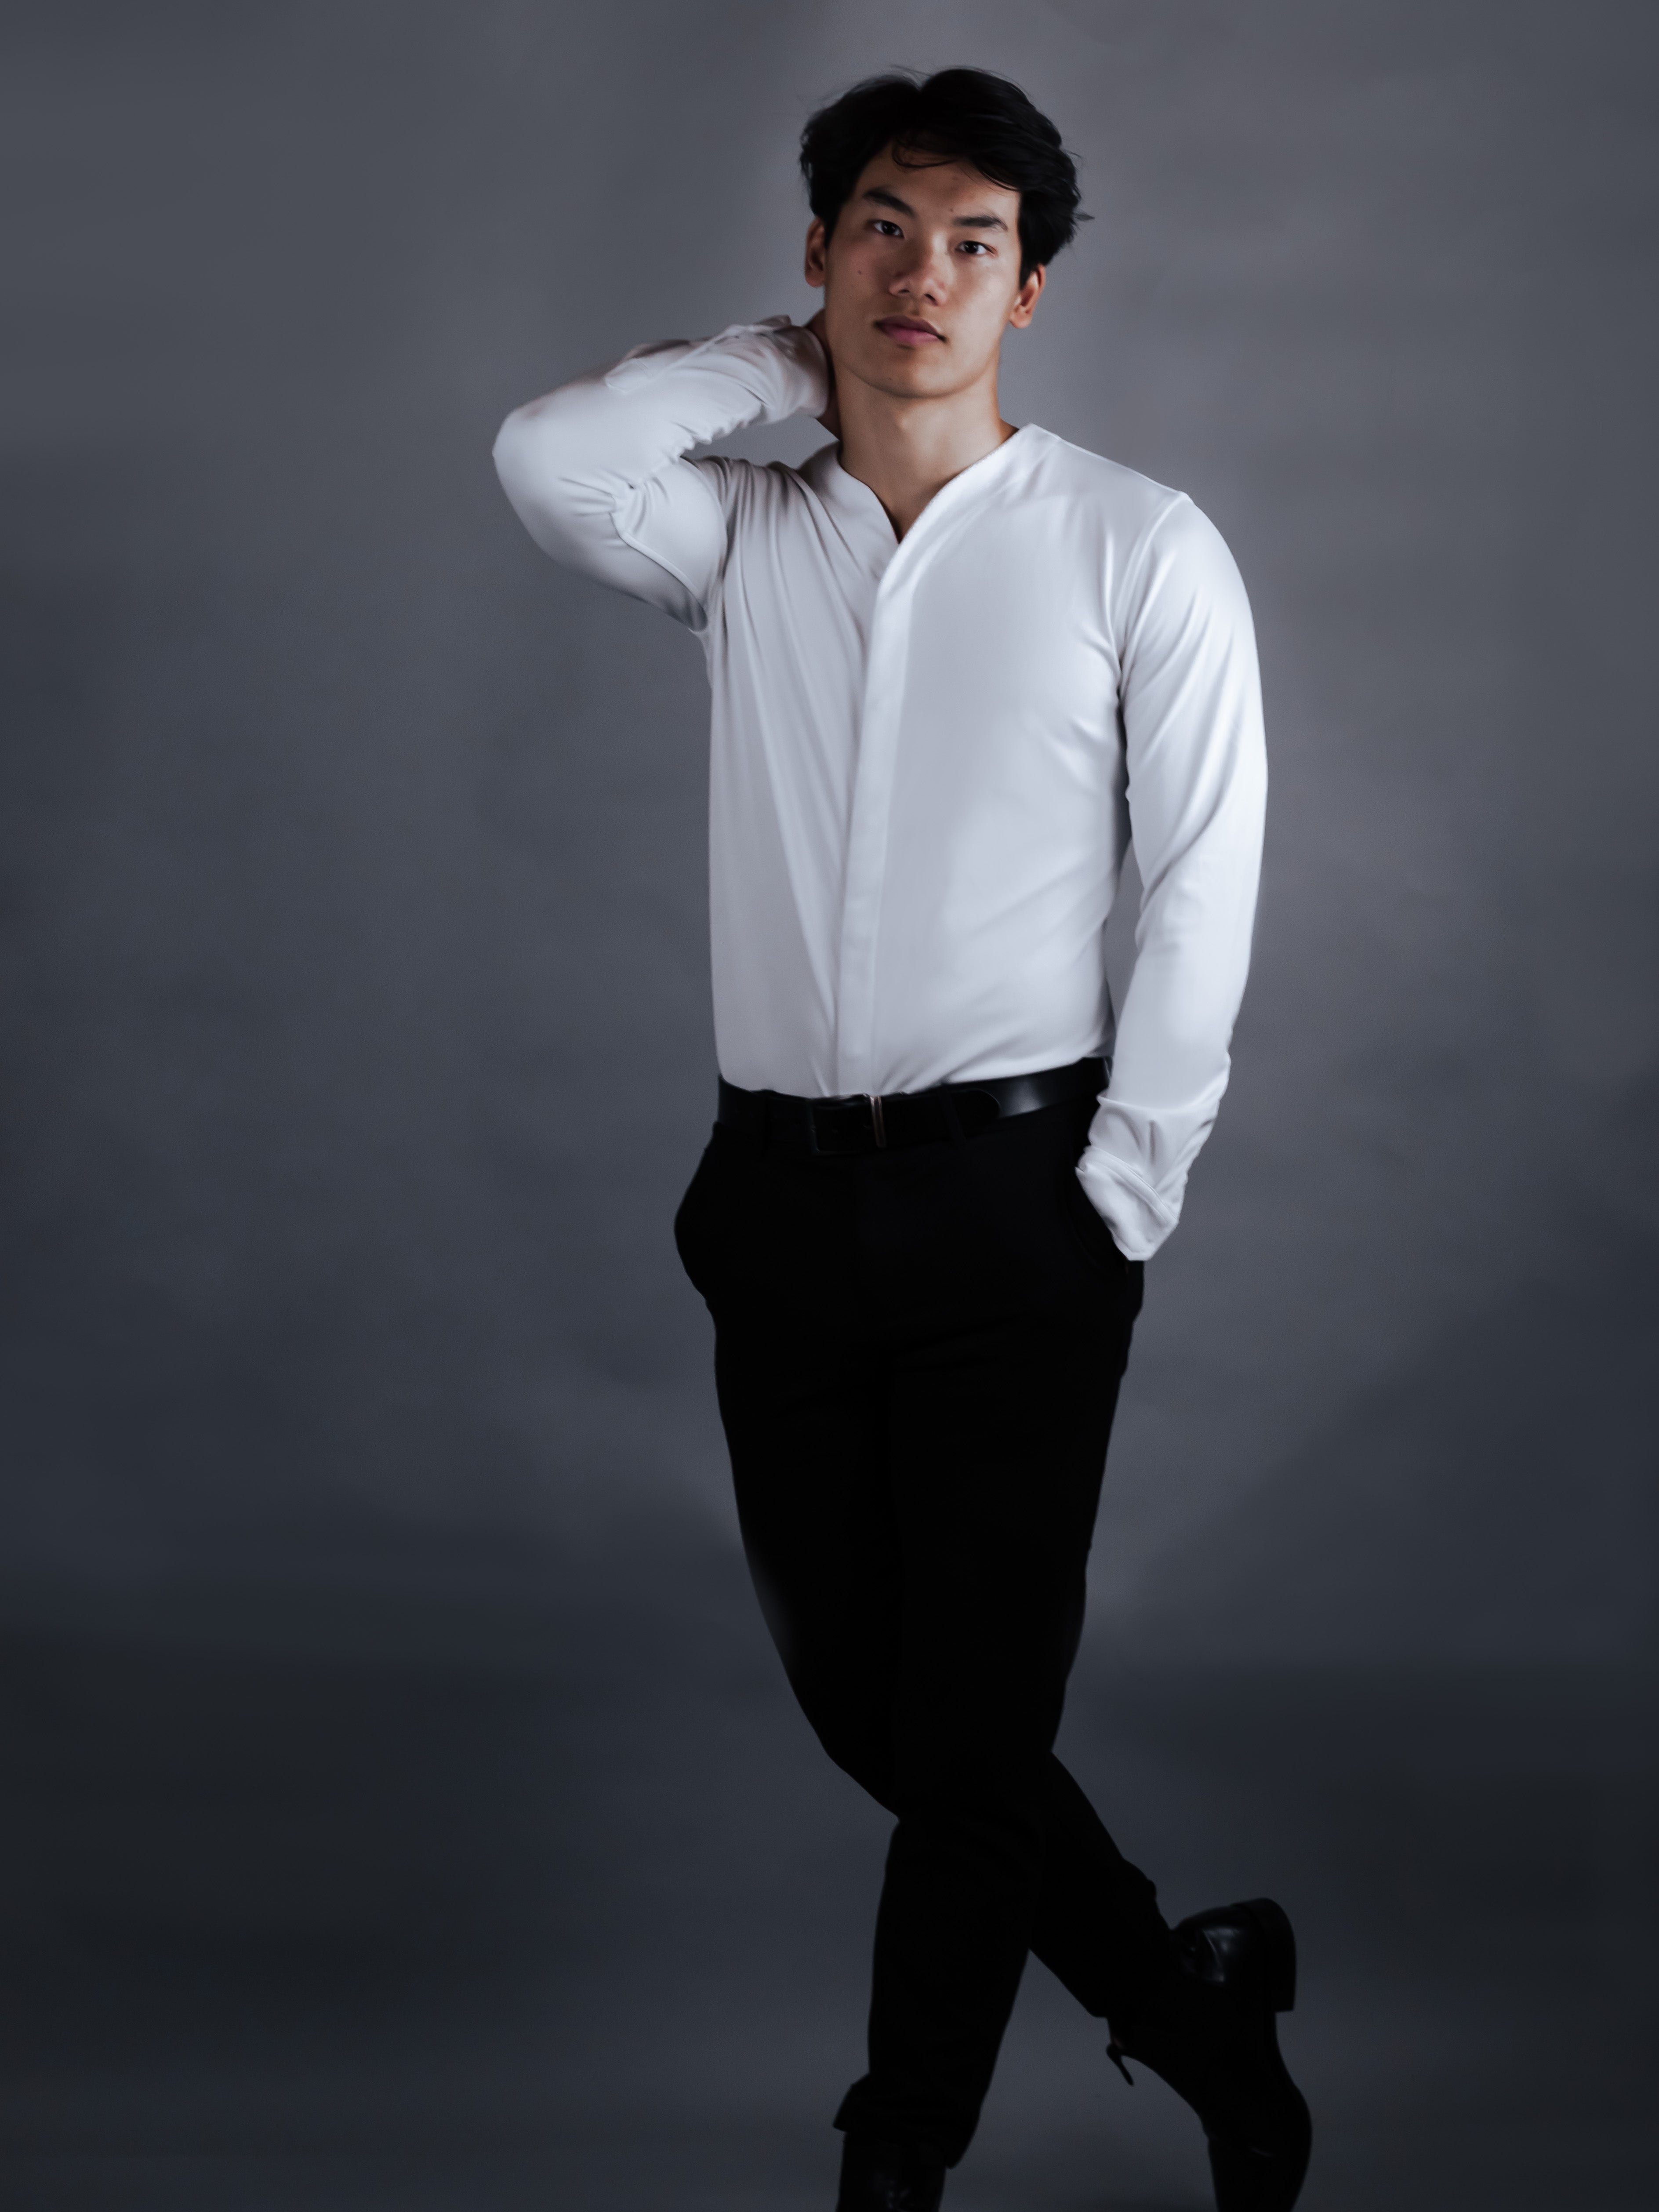 Model with a modern dress shirt on with dark pants